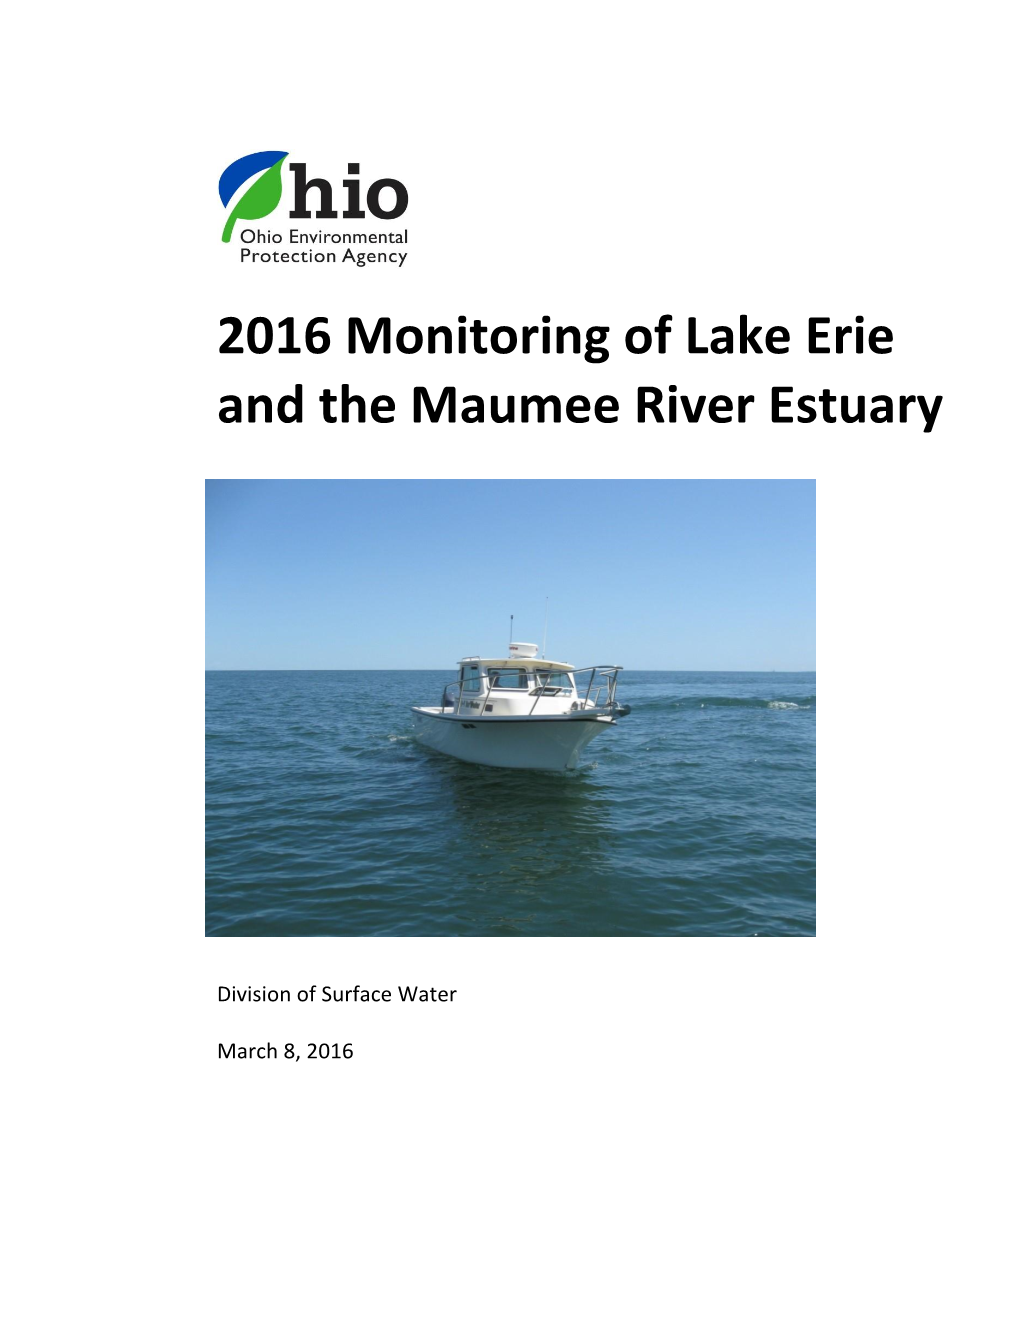 2016 Monitoring of Lake Erie and the Maumee River Estuary